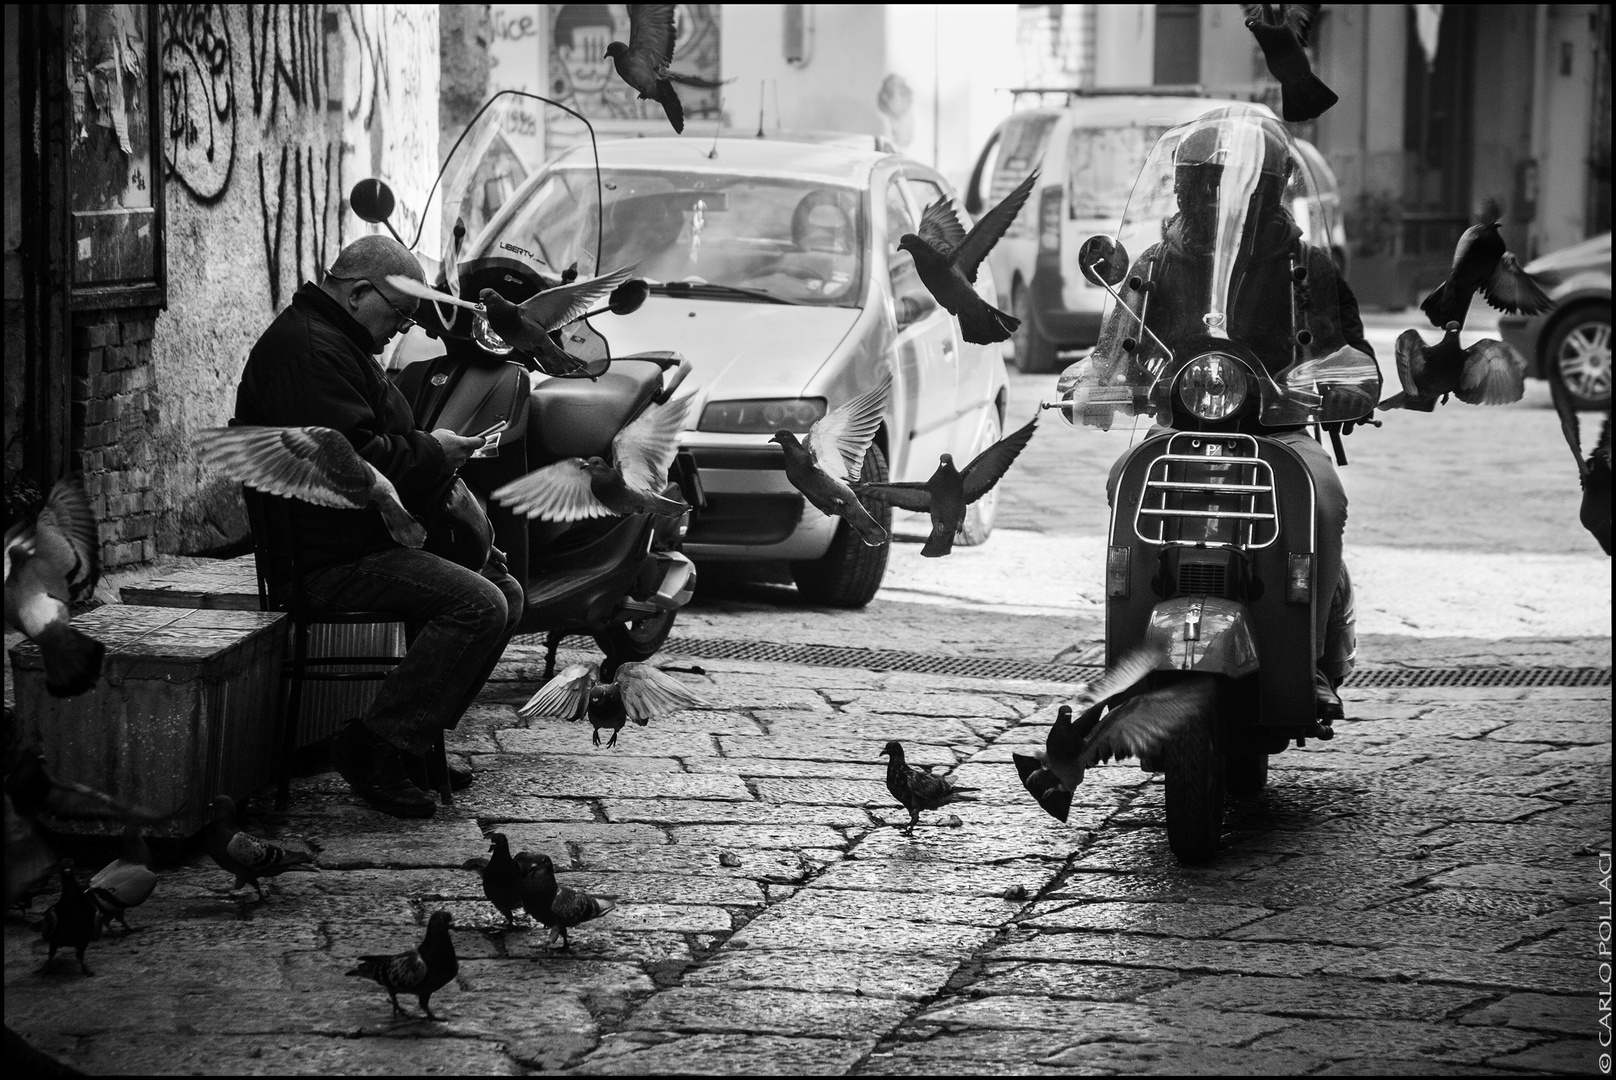 Scooters and pigeons